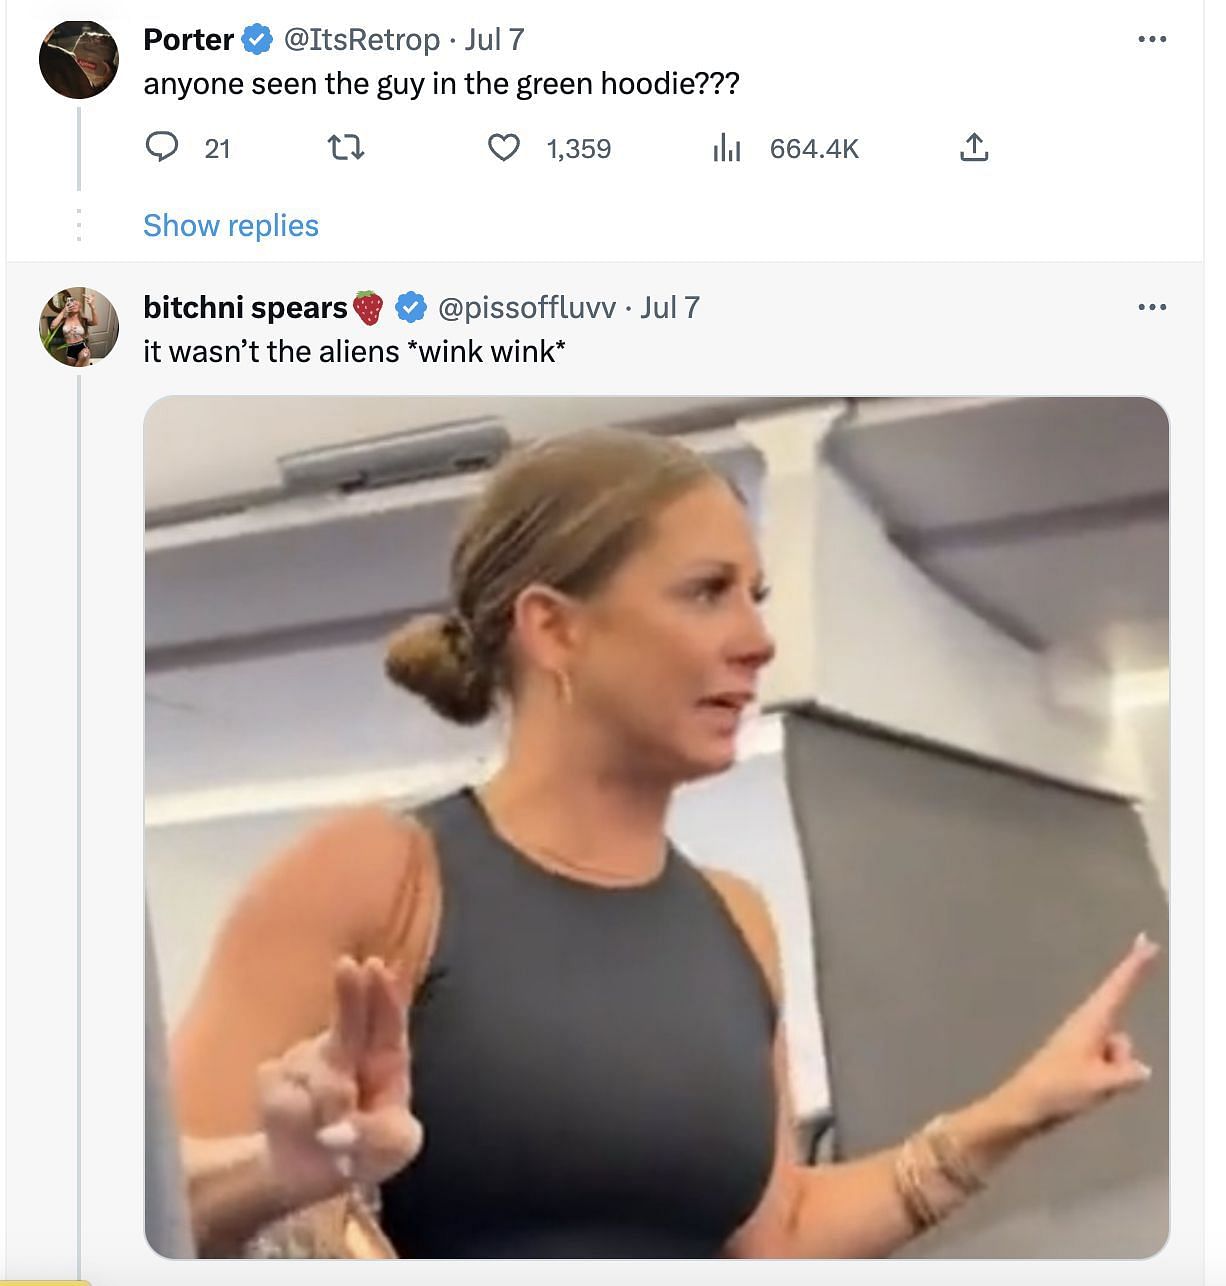 Social media users questioned the legitimacy of the rumor claiming that woman seen in the American Airlines video is missing. (Image via Twitter)